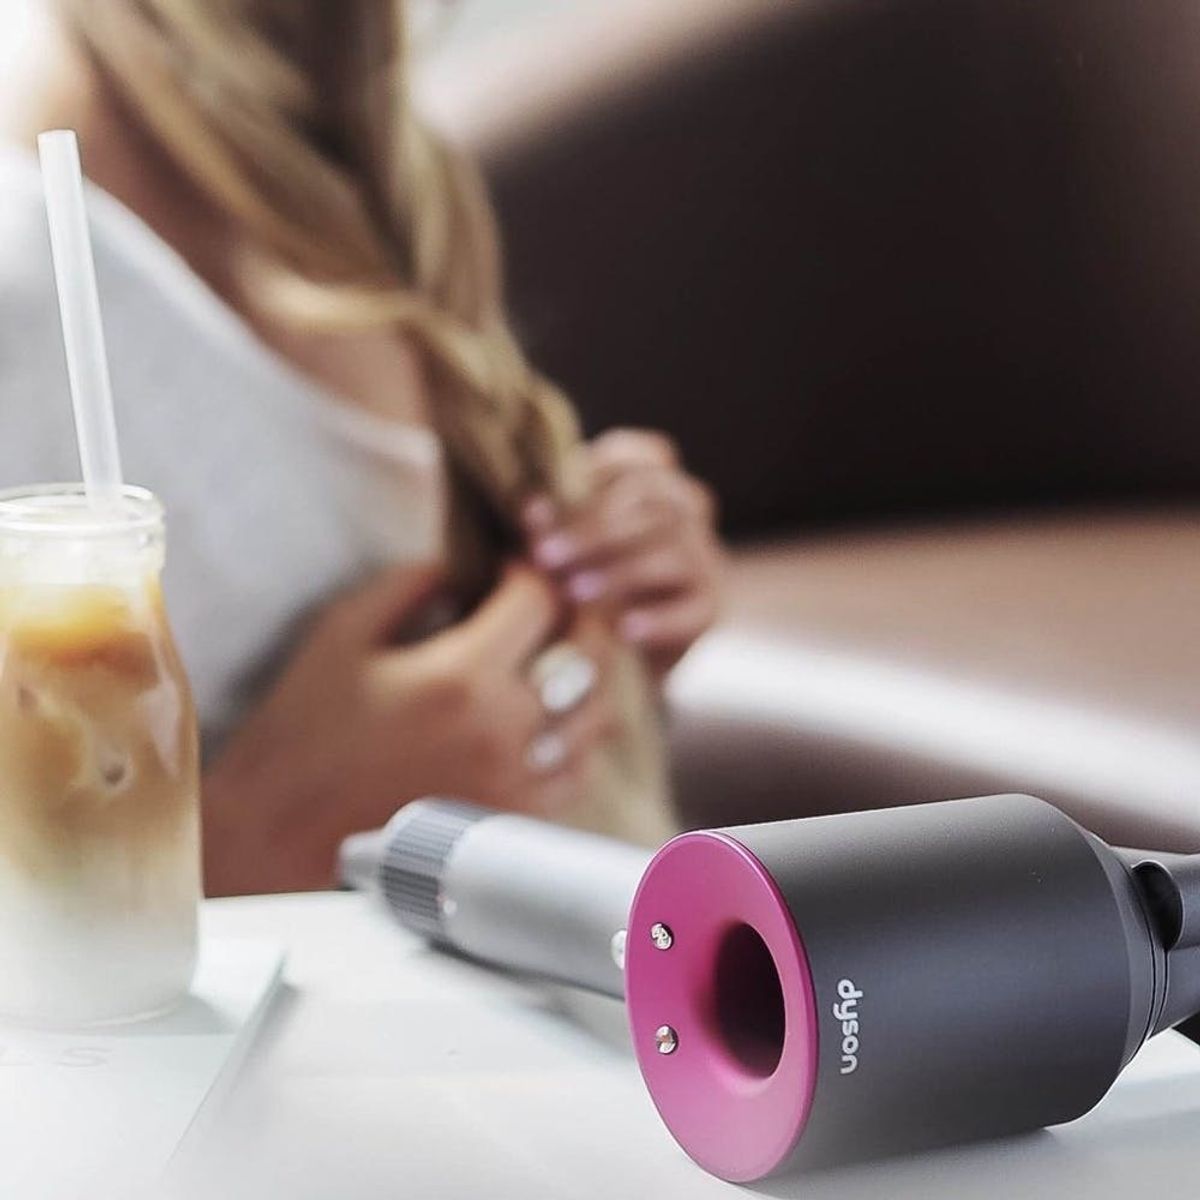 Here’s Why You’ll Actually Want to Drop $400 on This Hair Dryer